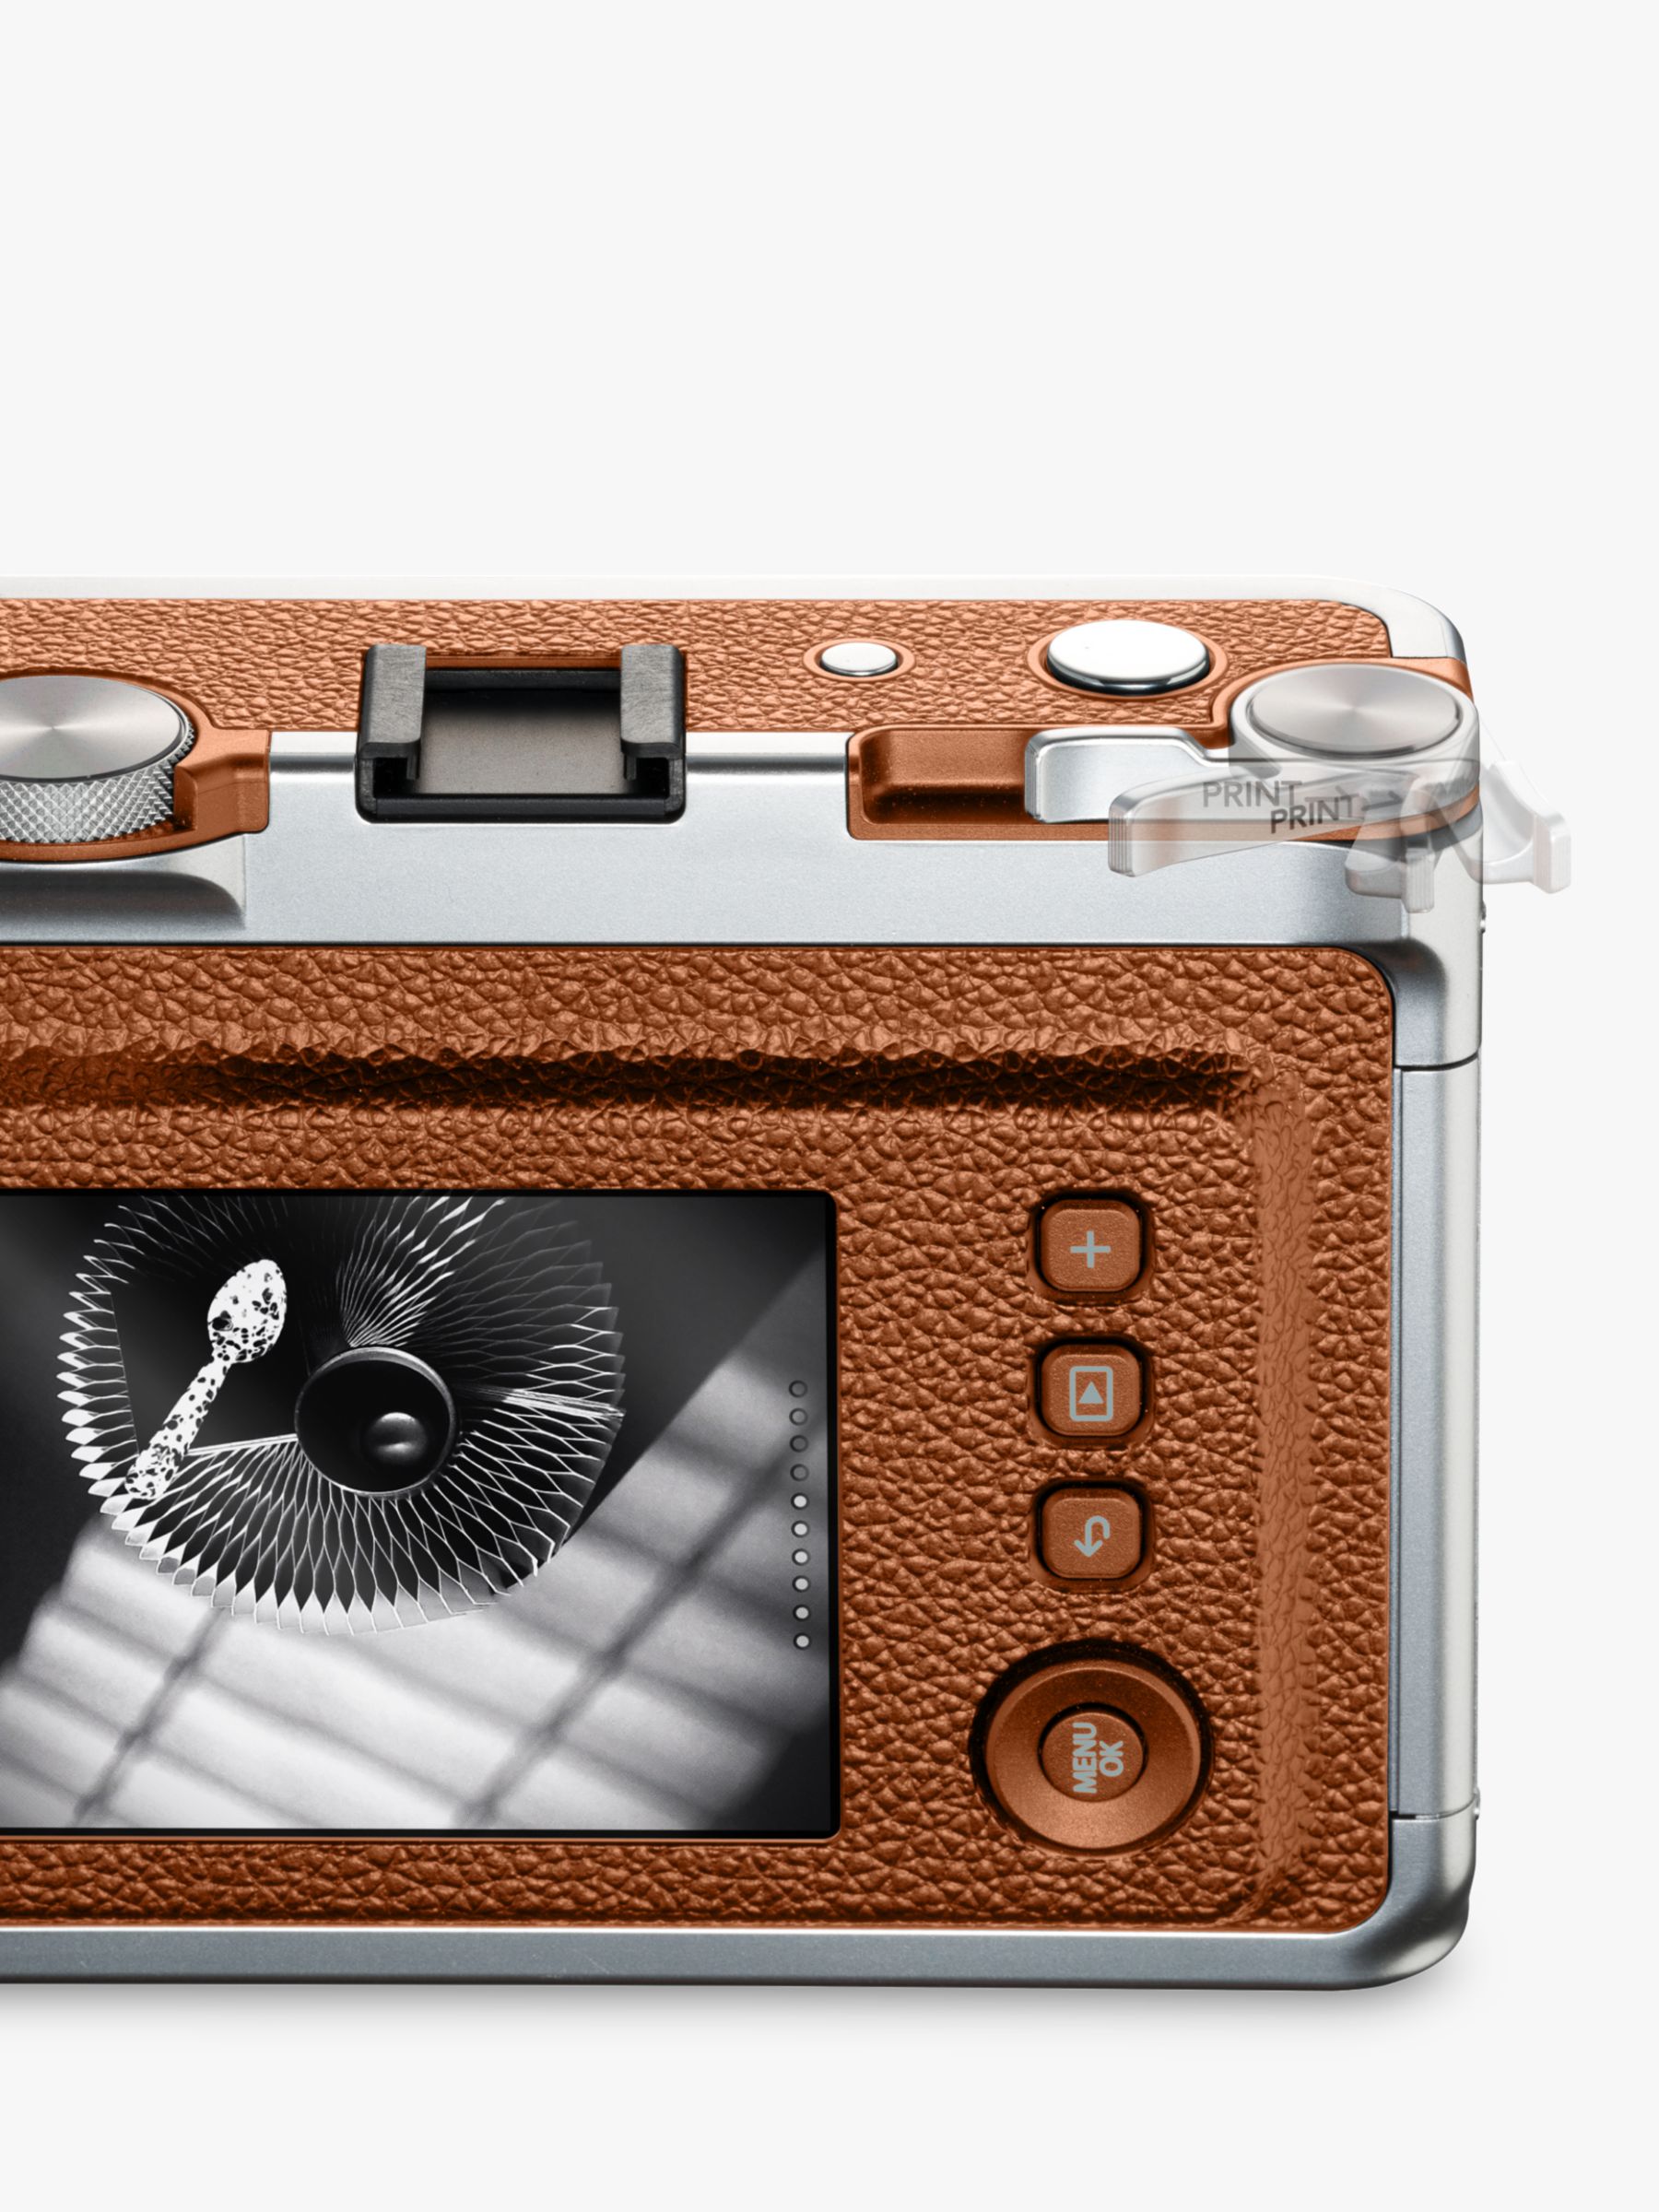 Fujifilm's new Instax Mini Evo Hybrid is an instant camera with 10  integrated lenses and 10 film effects: Digital Photography Review